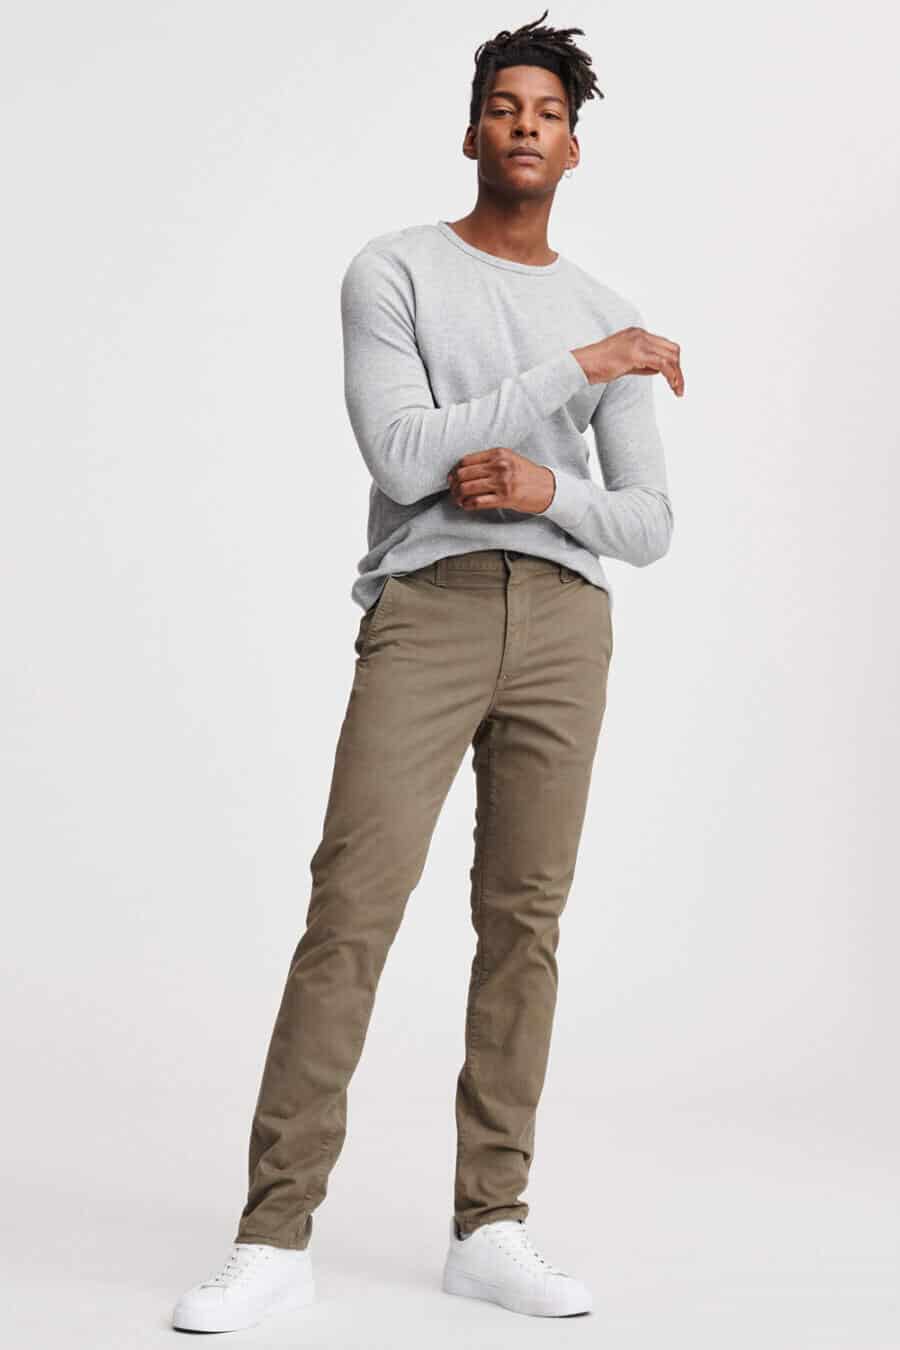 Men's khaki green pants worn with a grey sweatshirt and white sneakers